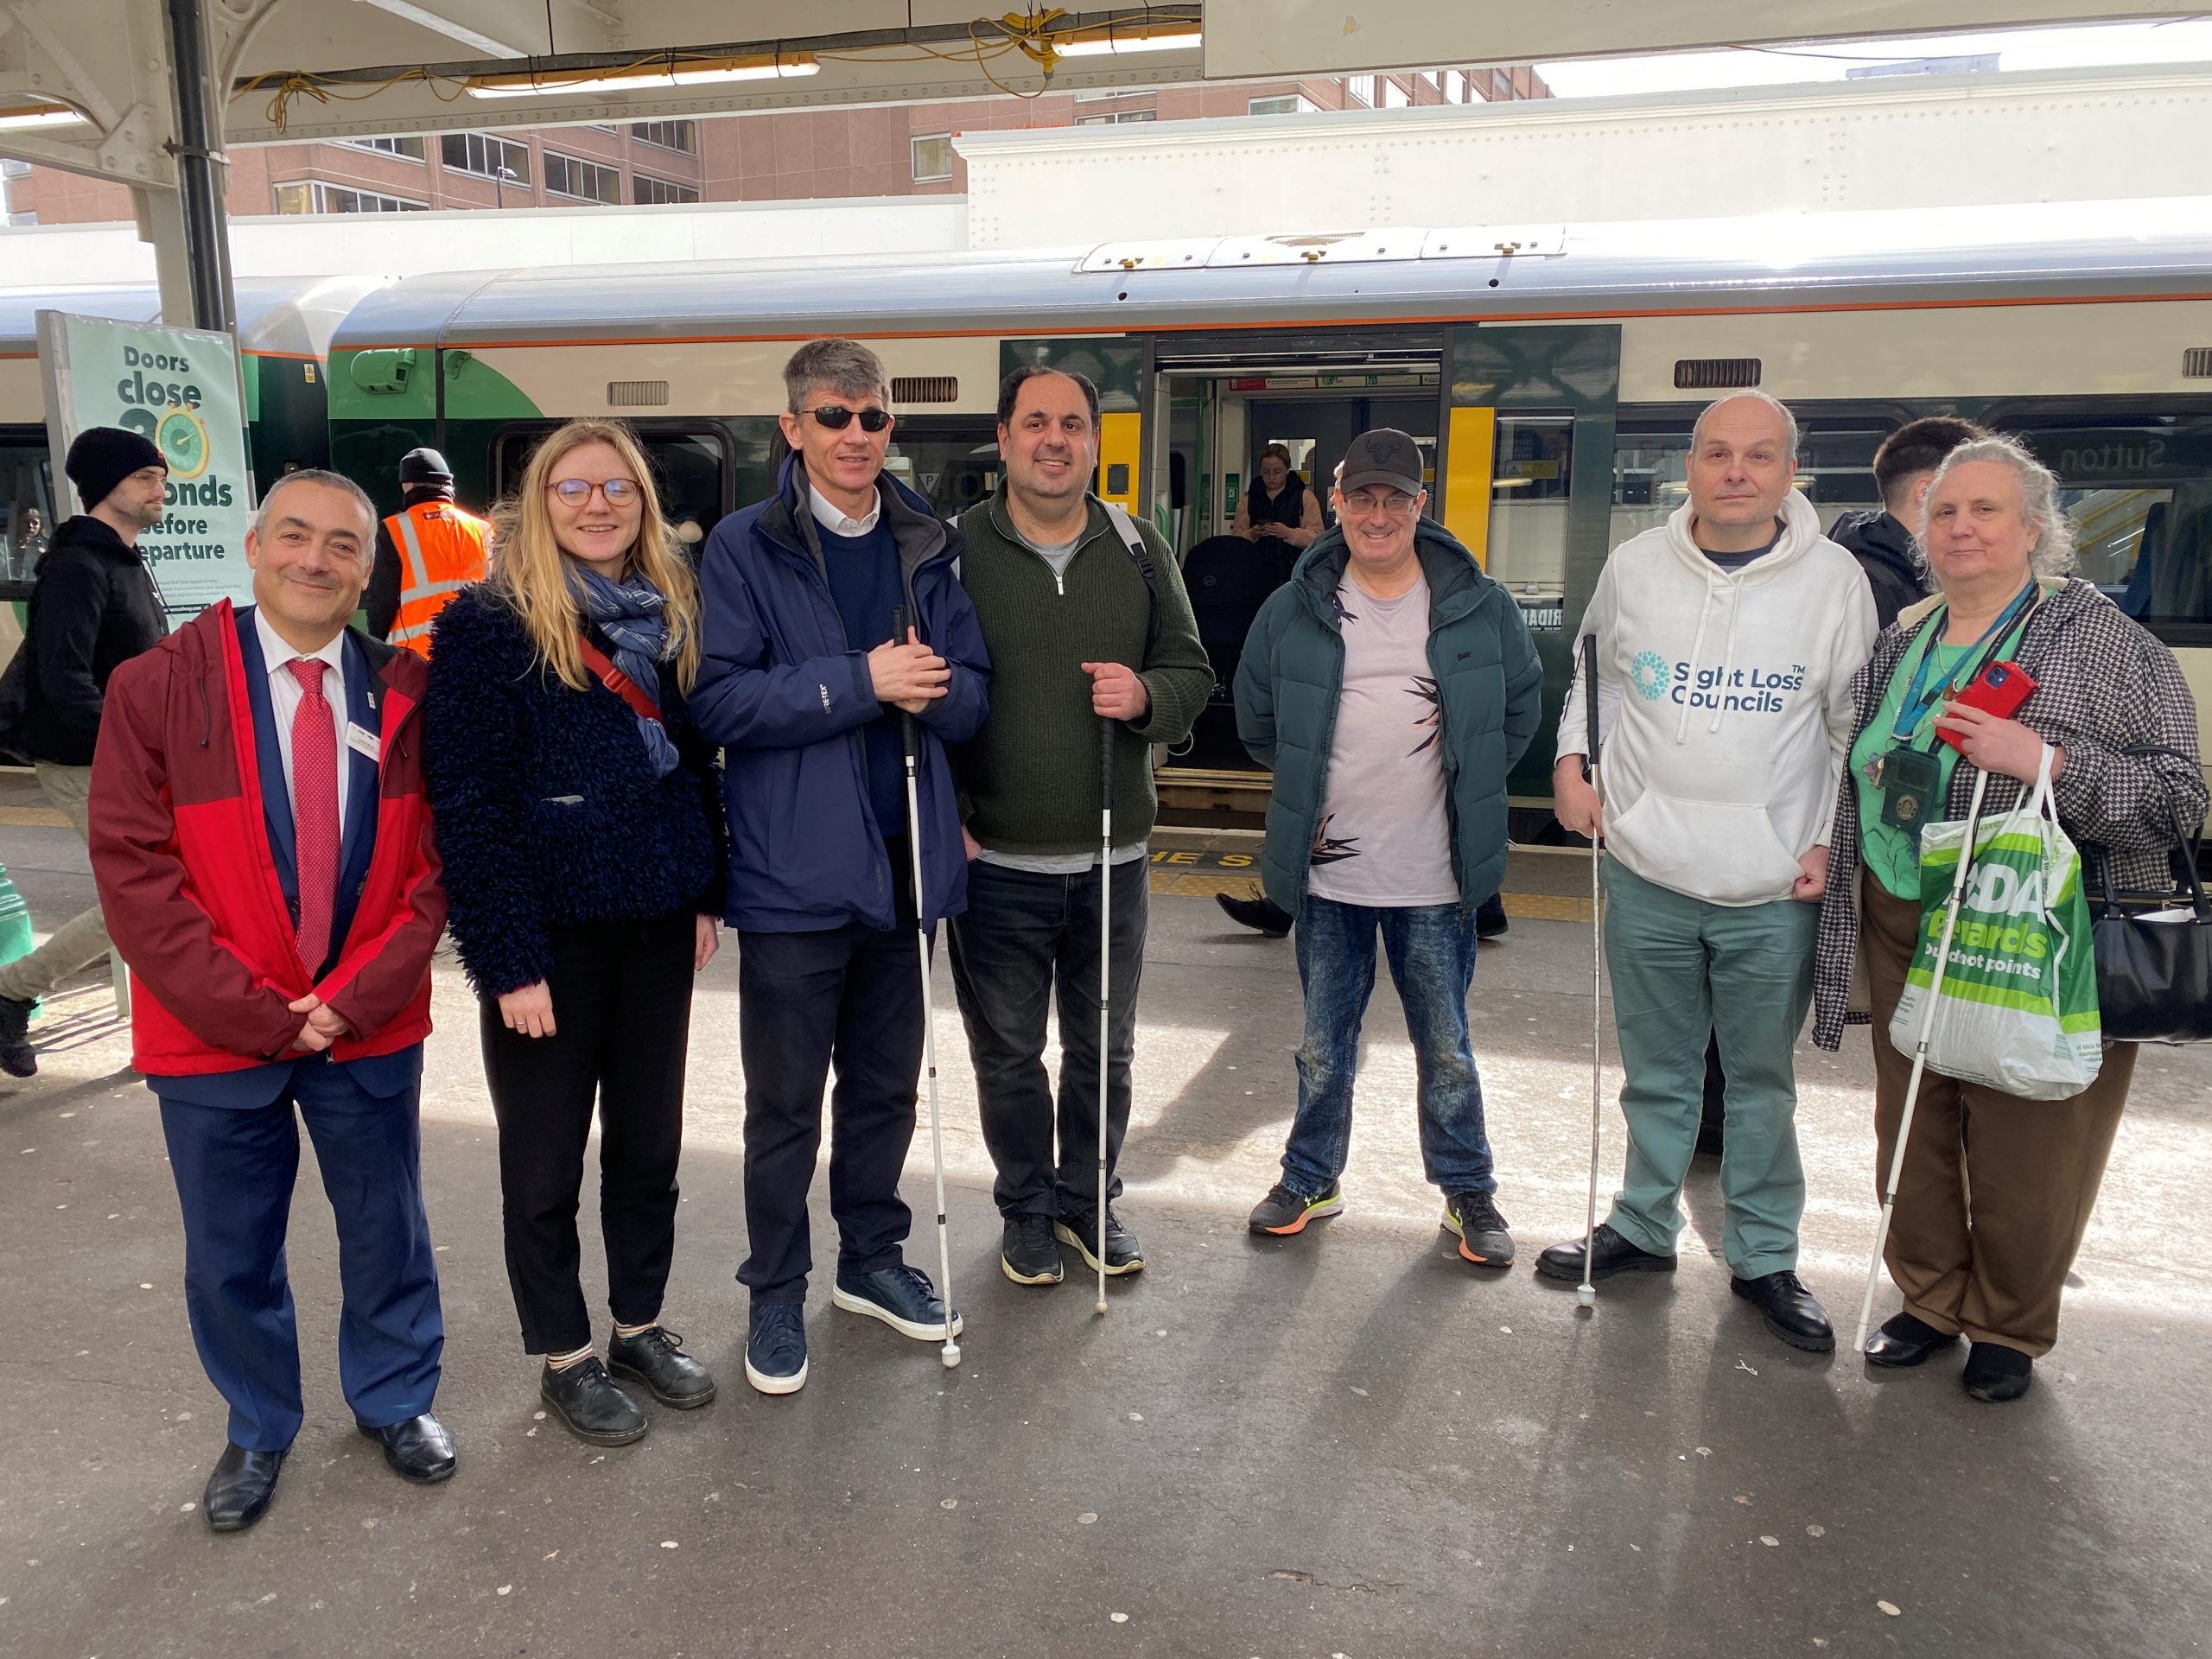 Antony Merlyn, Accessibility Engagement Manager at Govia, standing with Lucy Williams, Senior Engagement Manager for South England, Dave Smith, Engagement Manager for South East England, Liam o'Caroll, London SLC coordinator, and volunteers.